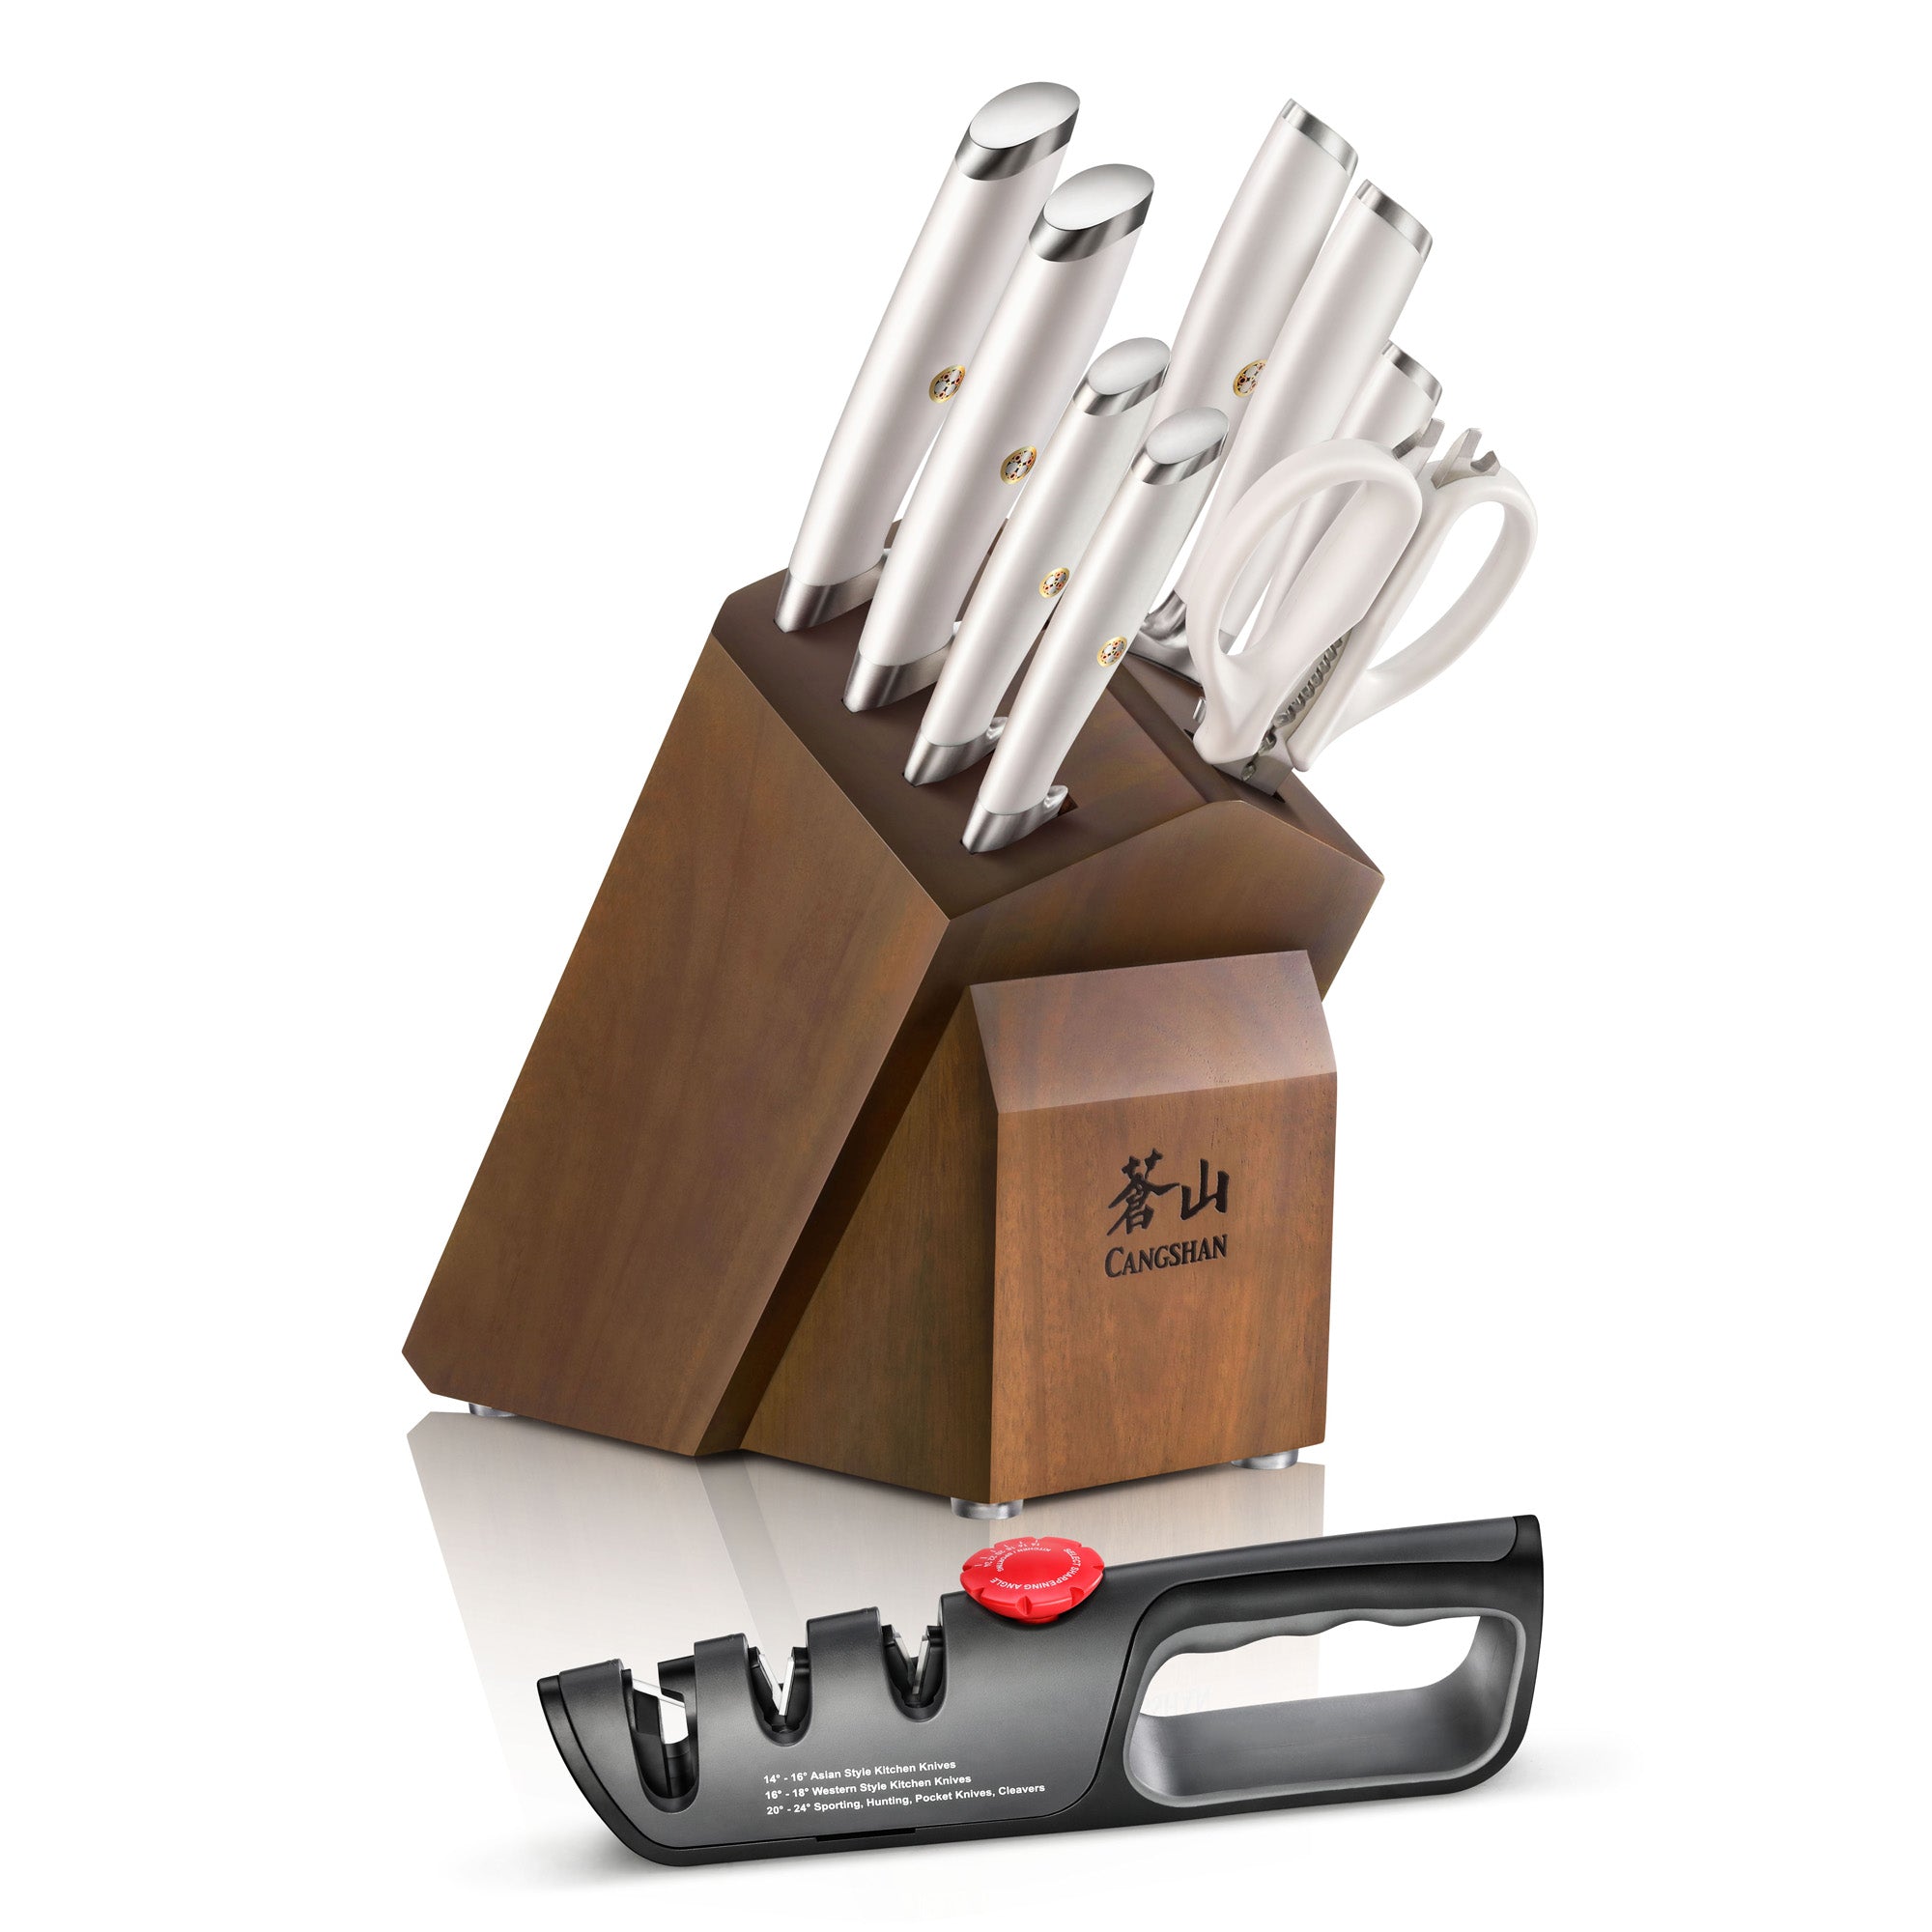 L1 Series 3-Piece Starter Knife Set, White, Forged German Steel, 10269 –  Cangshan Cutlery Company